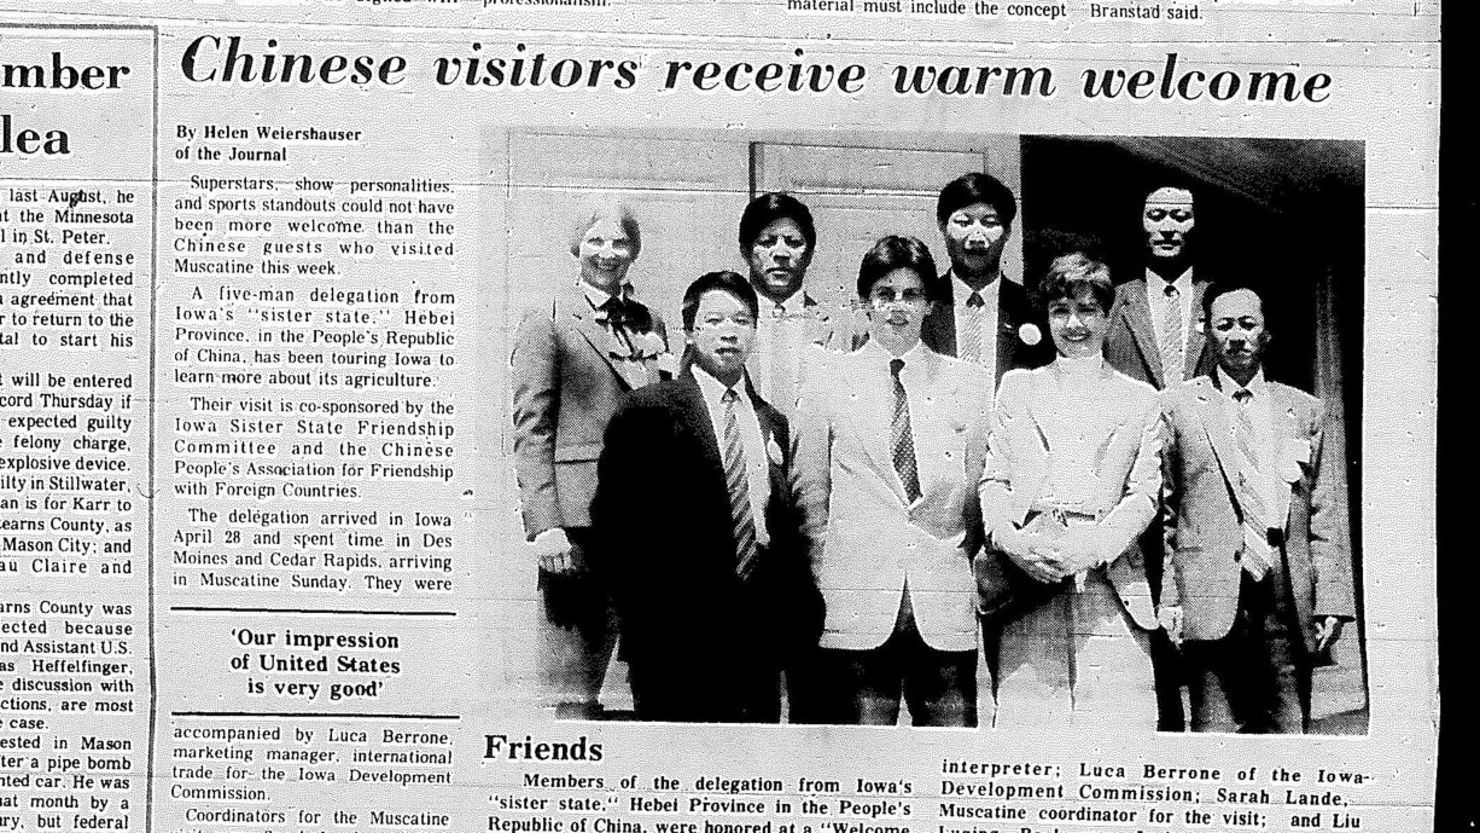 The Muscatine Journal ran a photo of Xi Jinping's visit to the Iowa farm town as an agriculture official in 1985. 